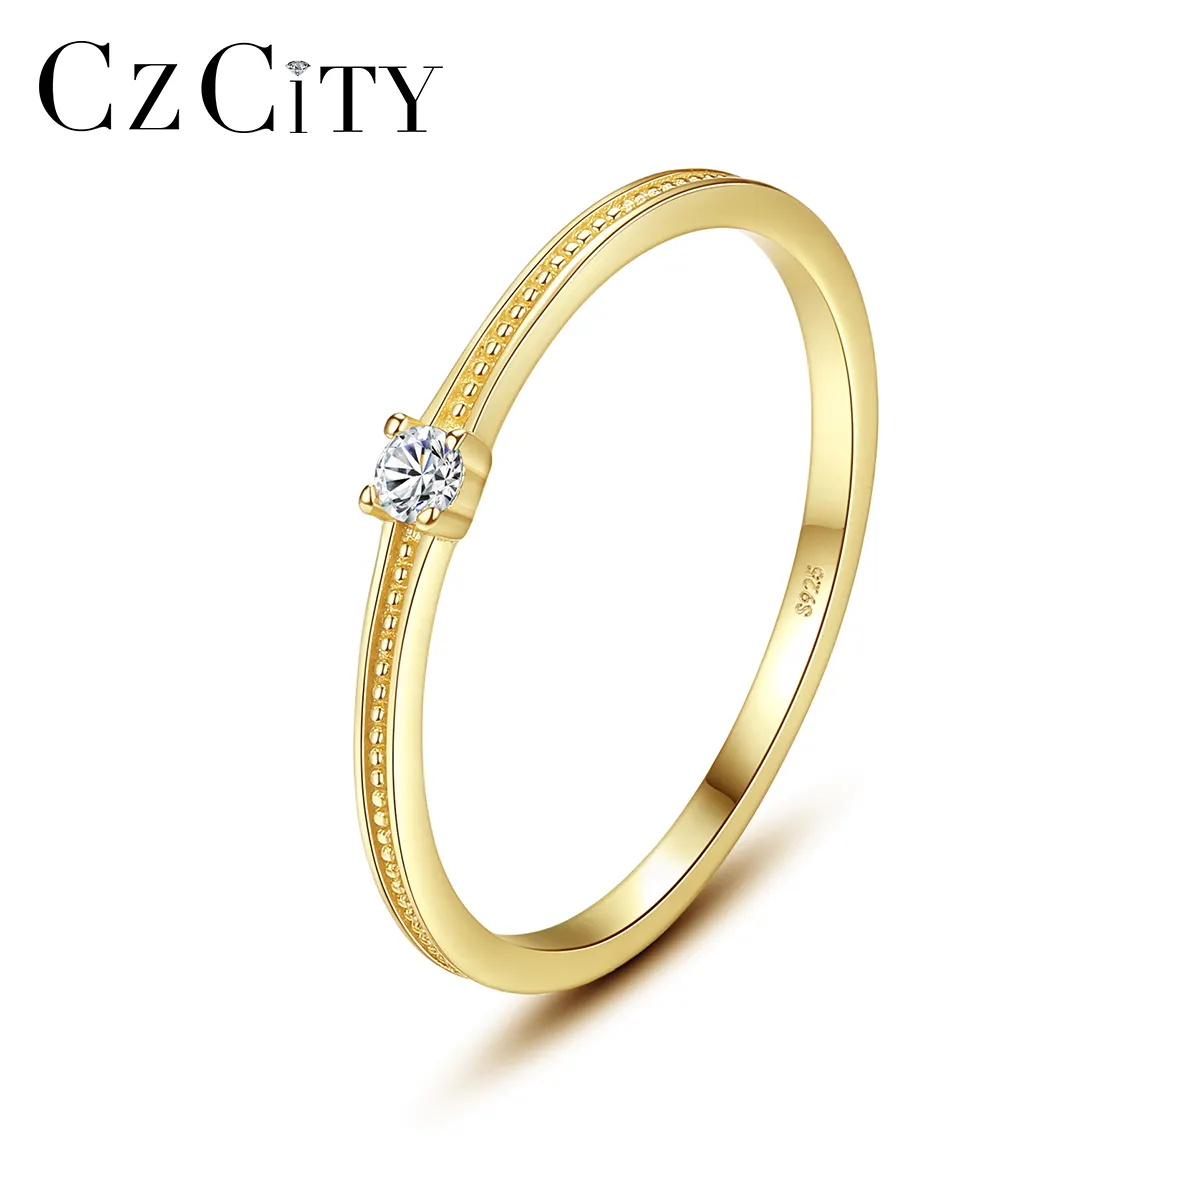 CZCITY 925 Ladies Ring 925 Silver 14K Gold Plated Women Designed Rings Wholesale